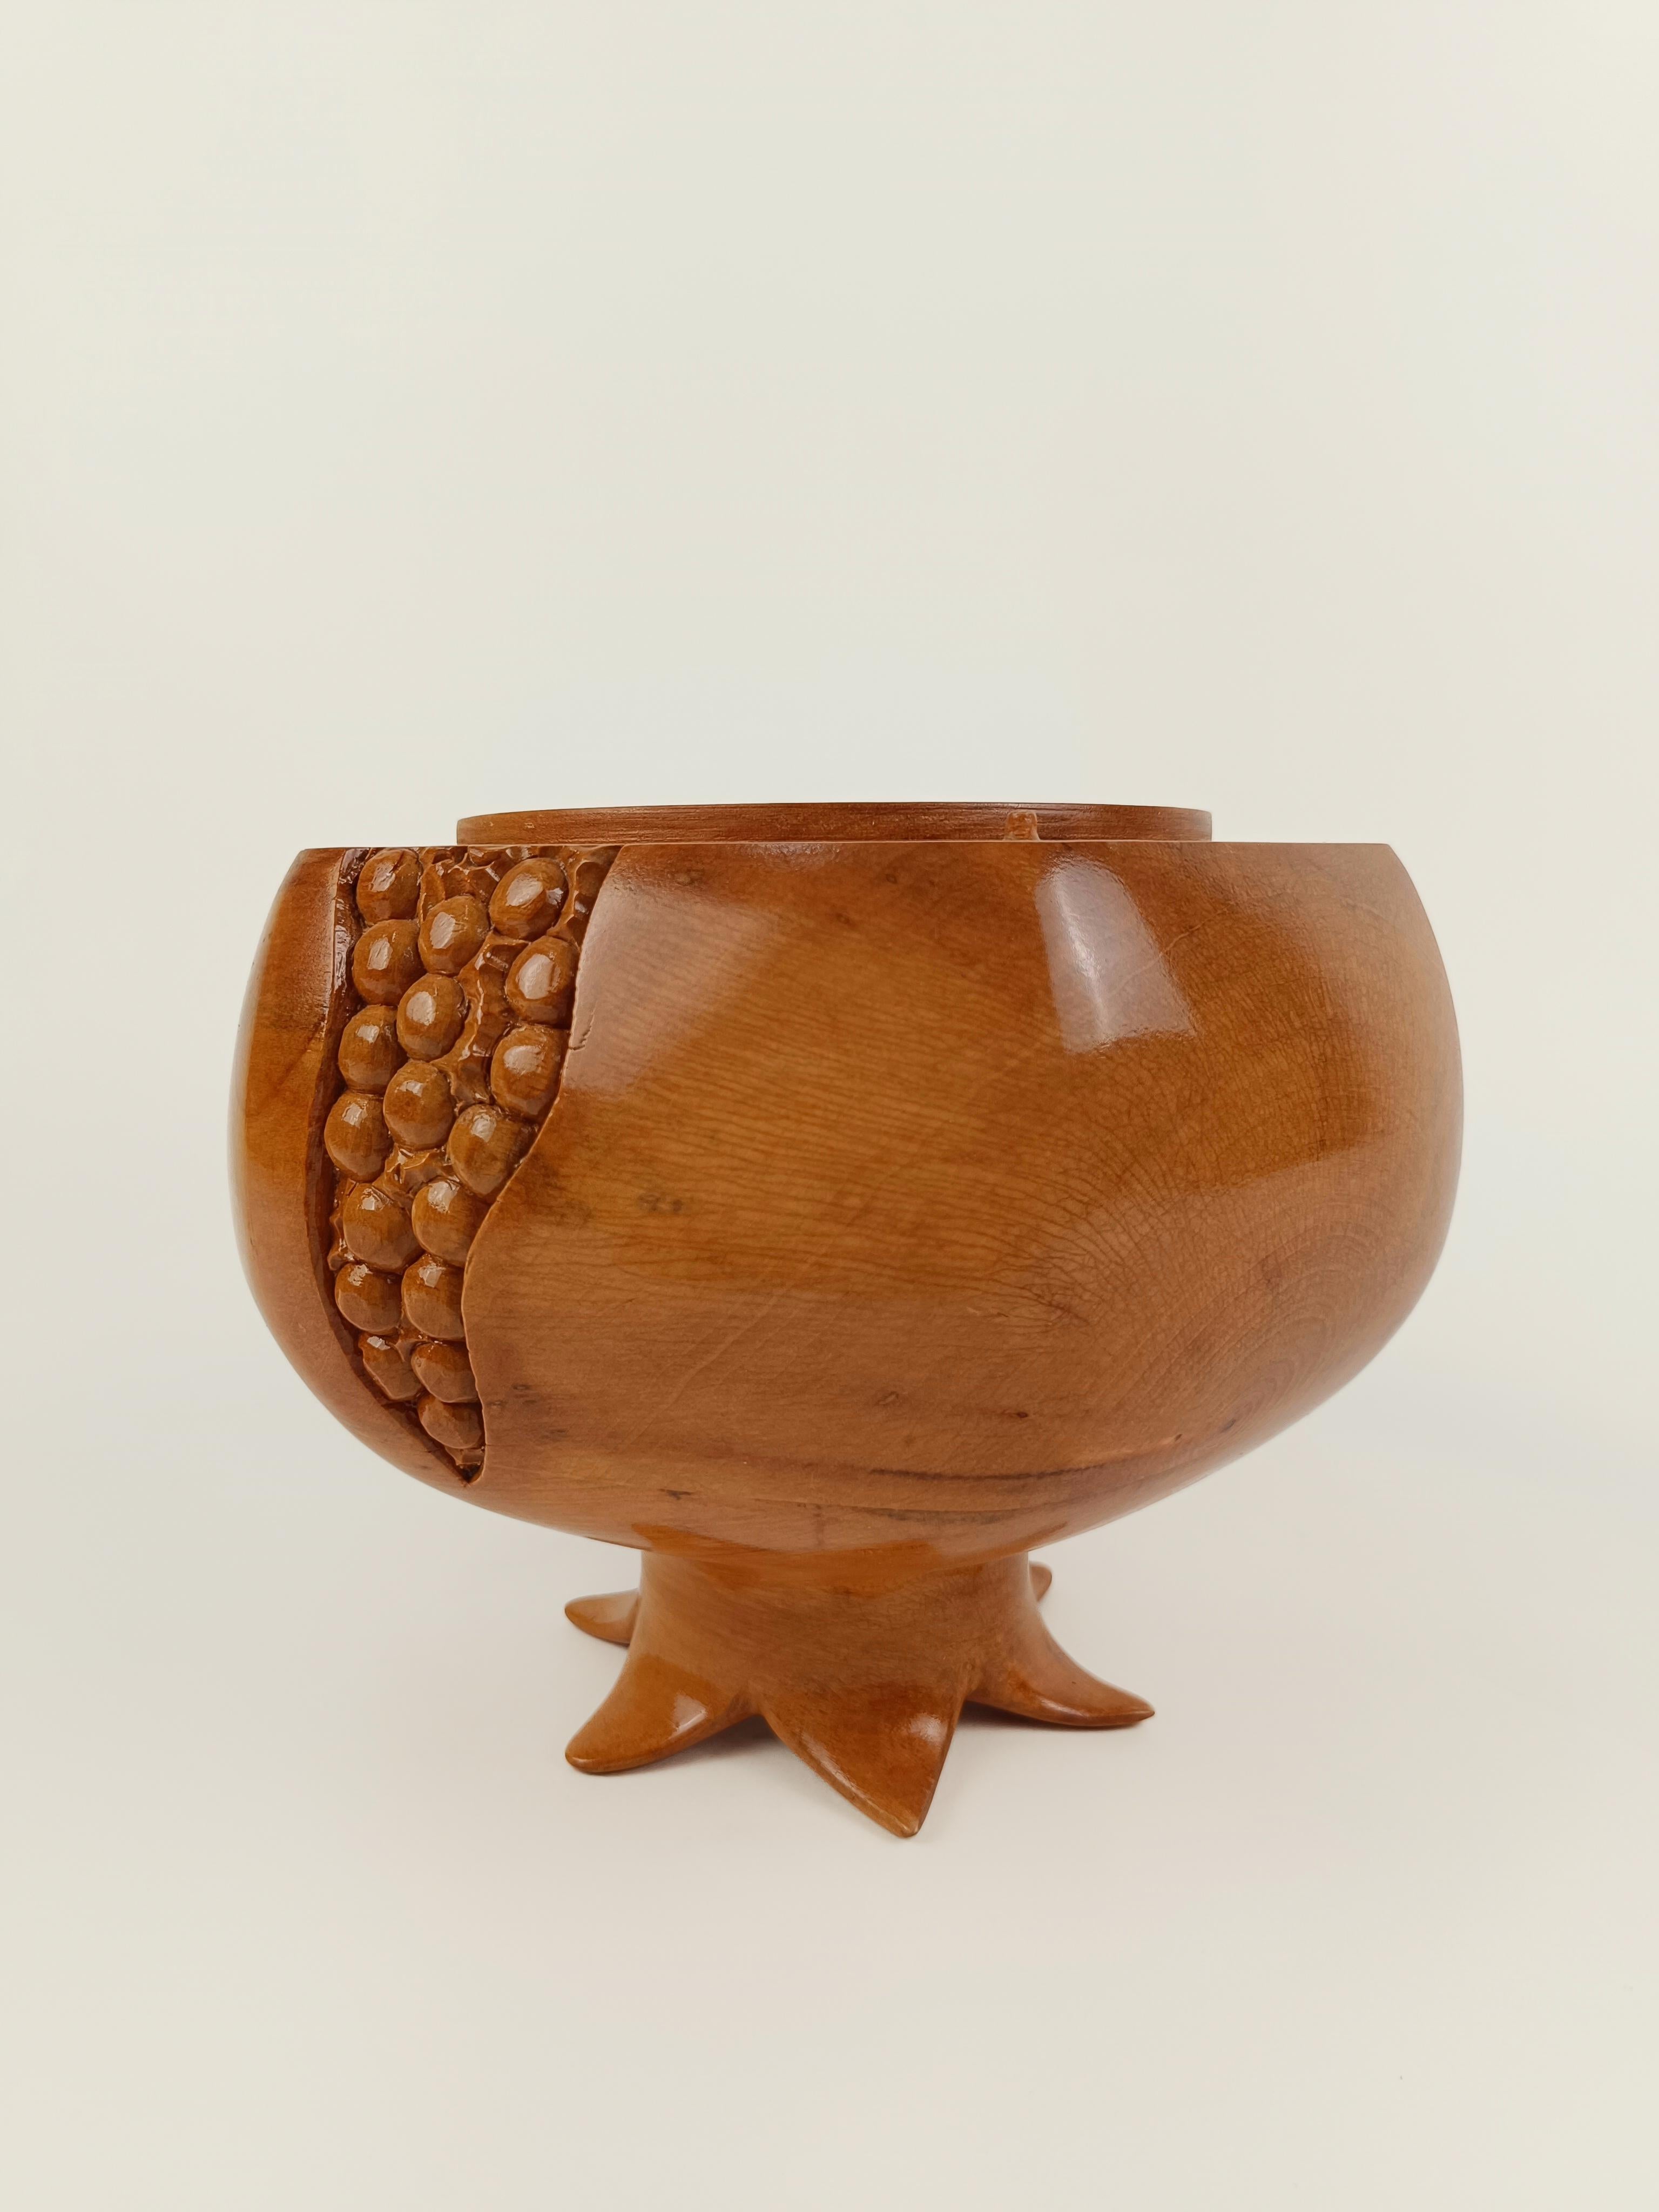 Sculptural Vintage Ice Bucket in maple wood carved in the shape of a pomegranate 3